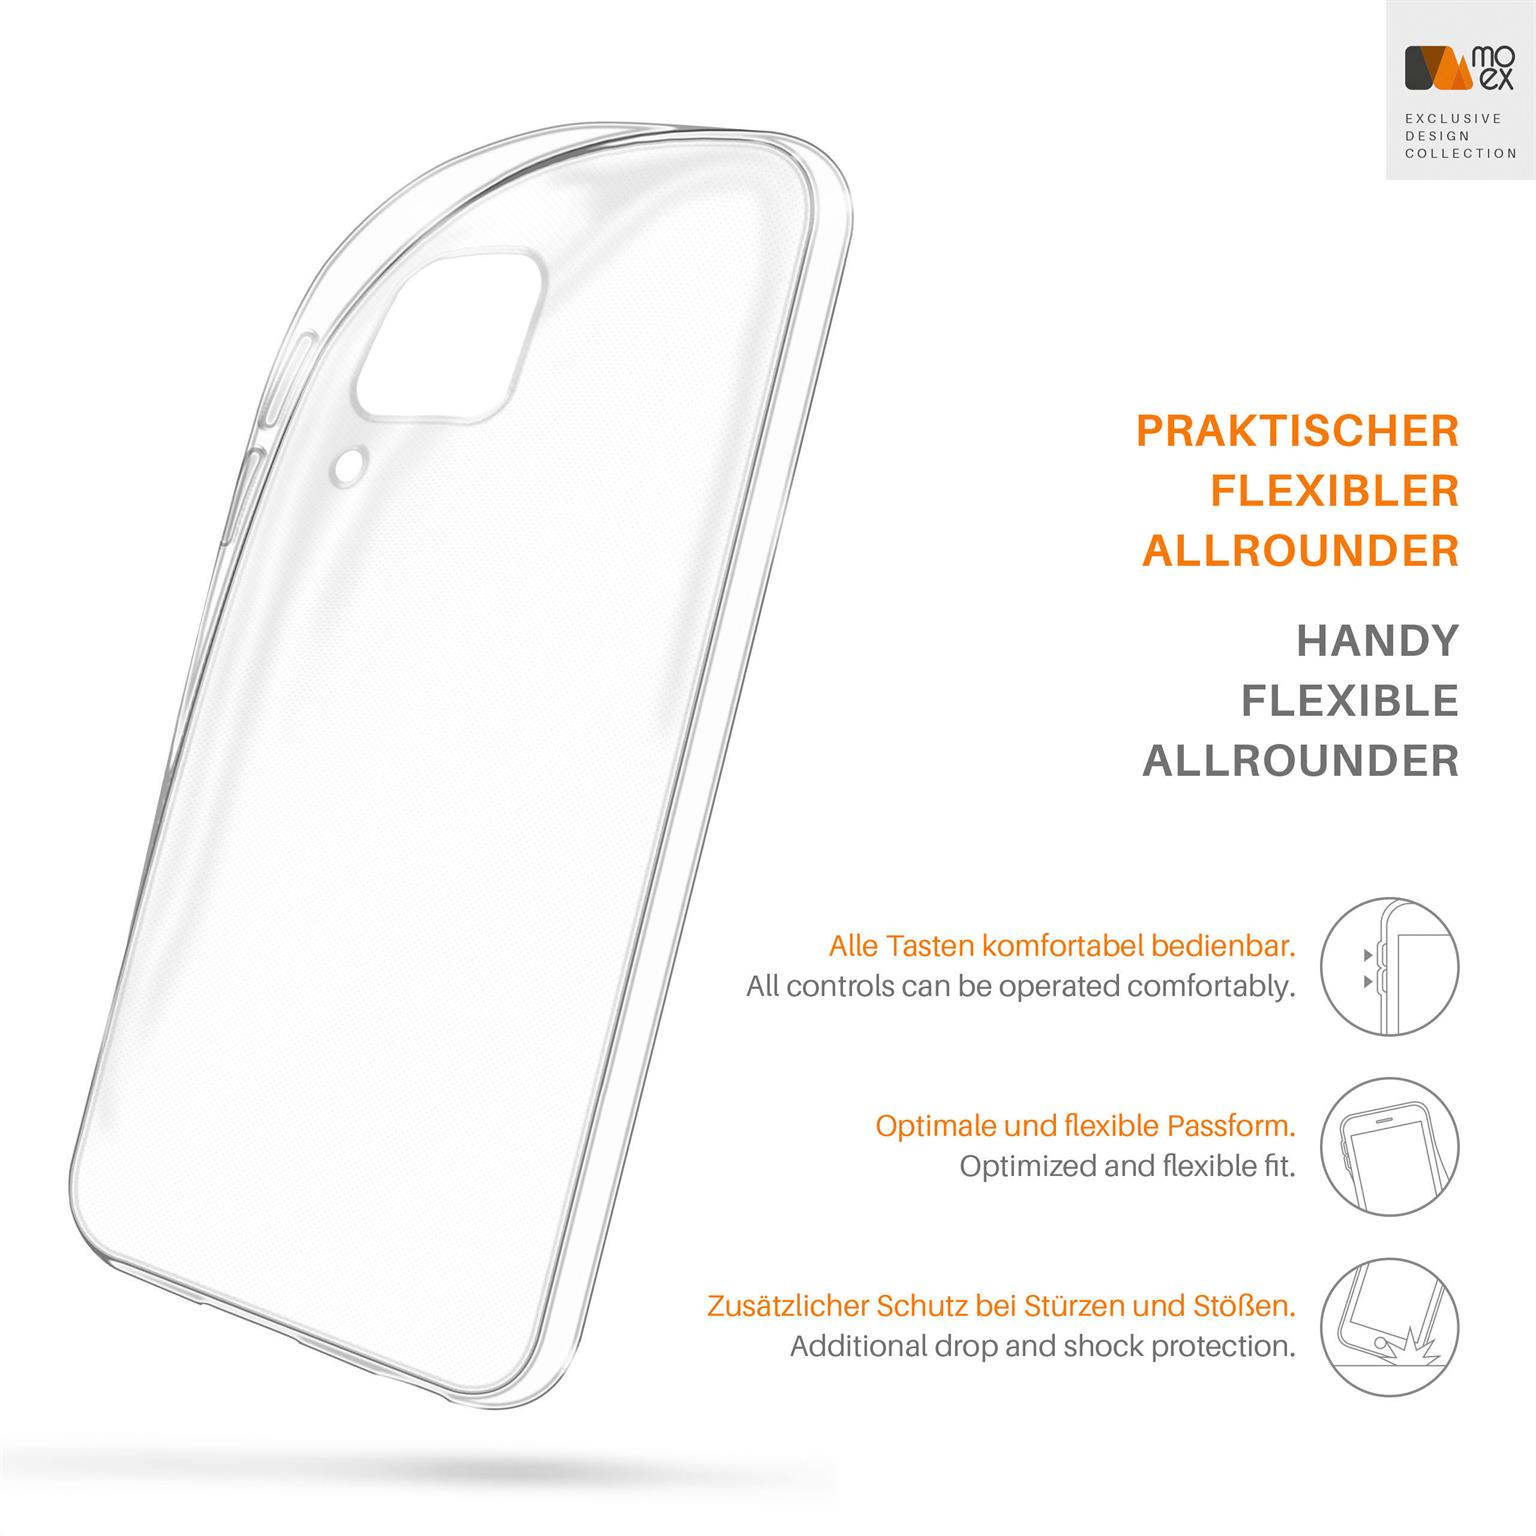 Crystal-Clear P40 MOEX Case, Huawei, Lite, Backcover, Aero